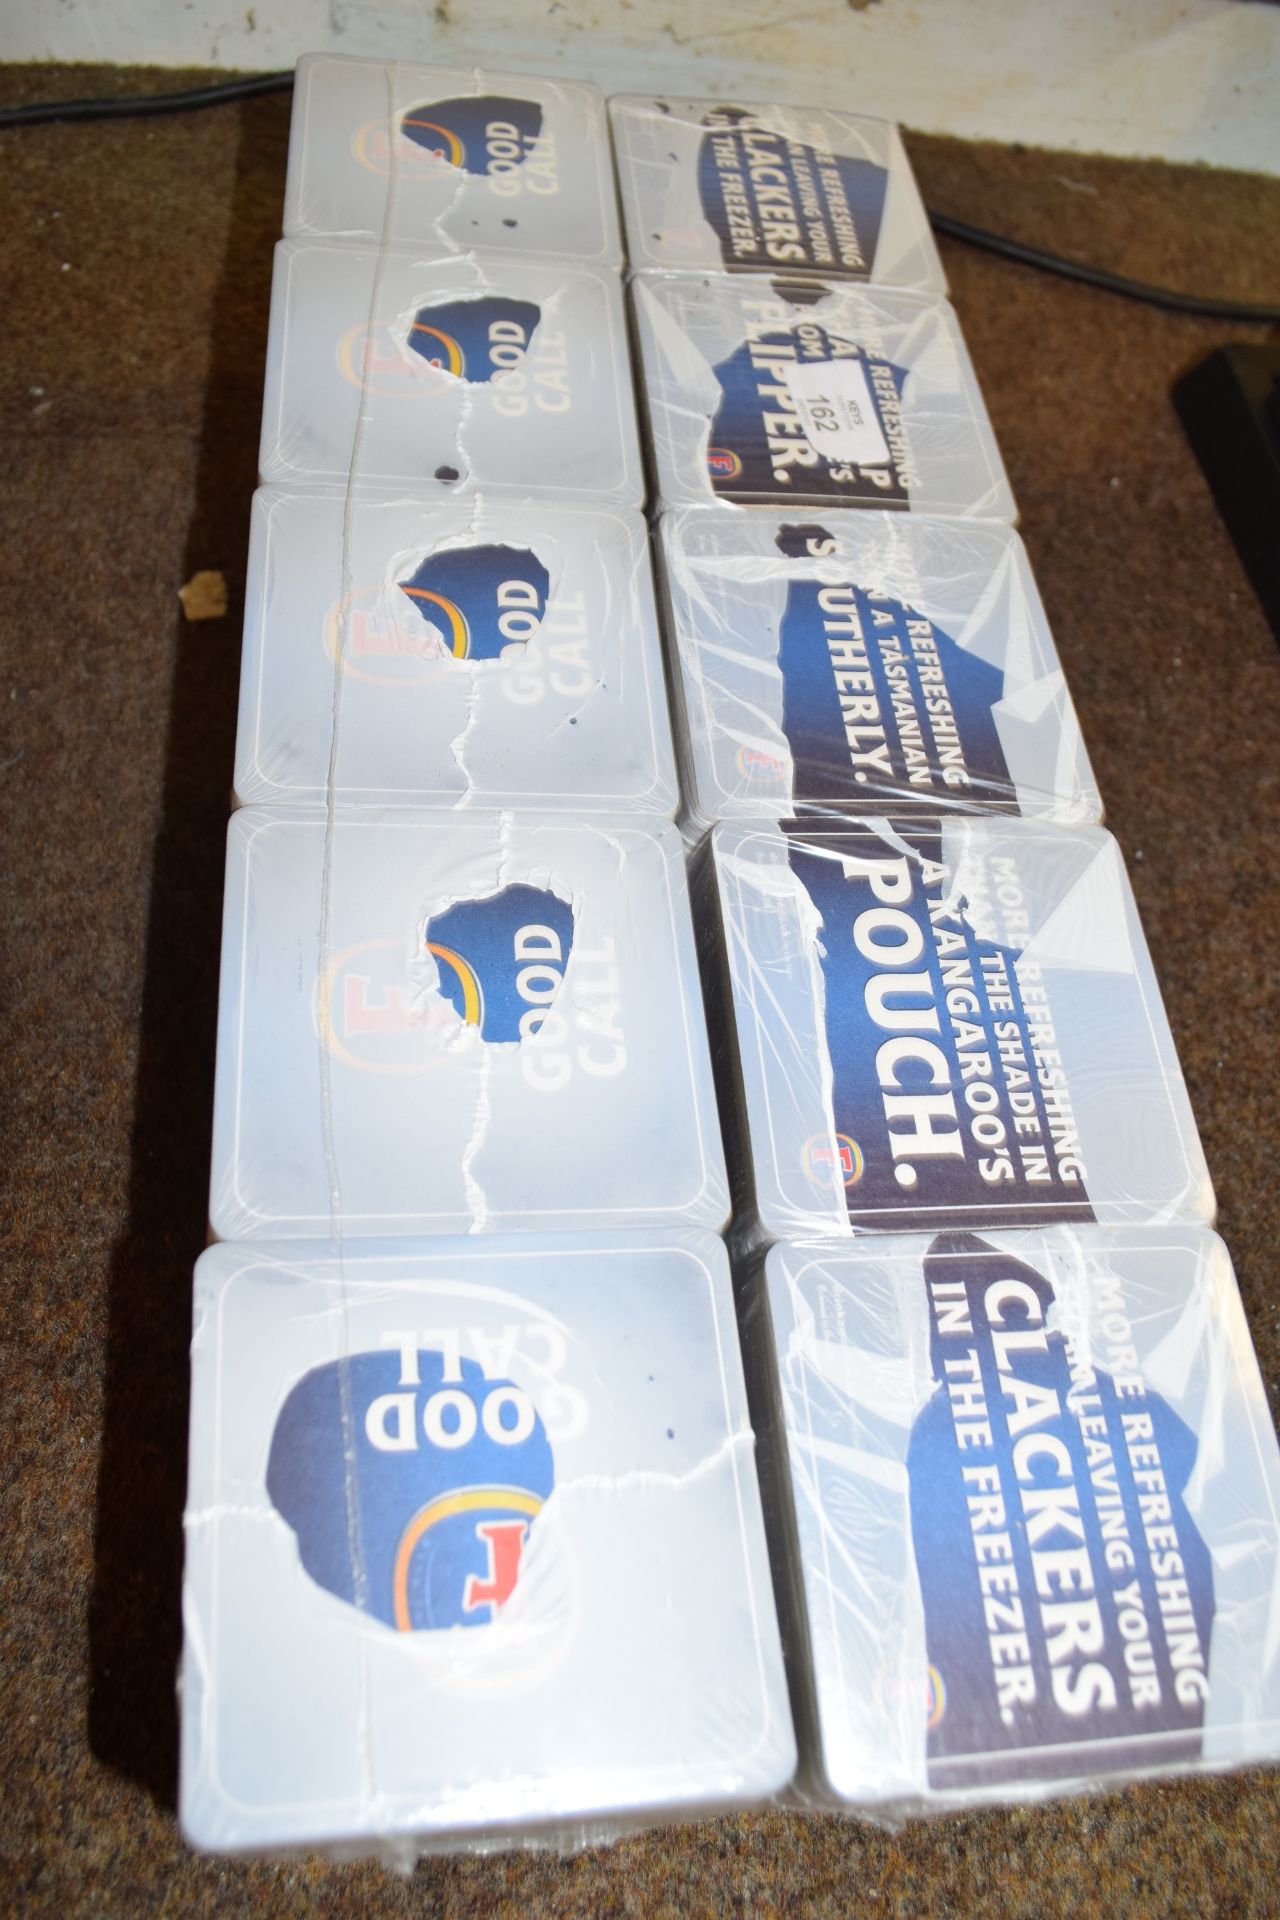 Two packs of Fosters beer mats